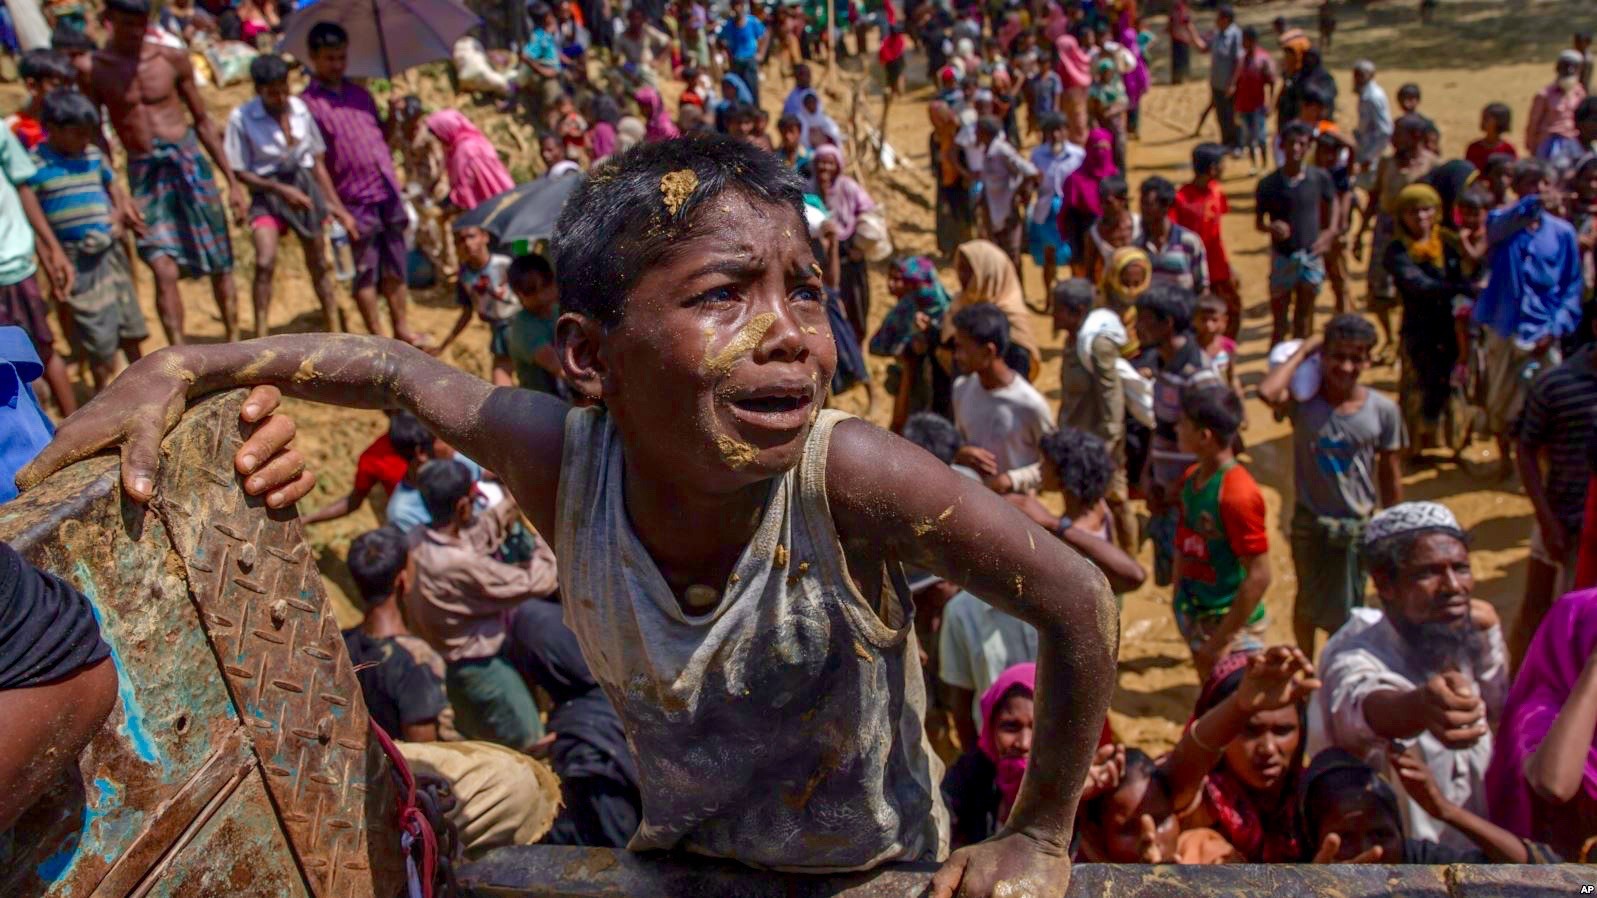 A Rohingya Muslim boy, who crossed over from Myanmar into Bangladesh, pleads with aid workers to give him a bag of rice near Balukhali refugee camp, Bangladesh, Thursday, Sept. 21, 2017. (Foto: AP/Dar Yasin)